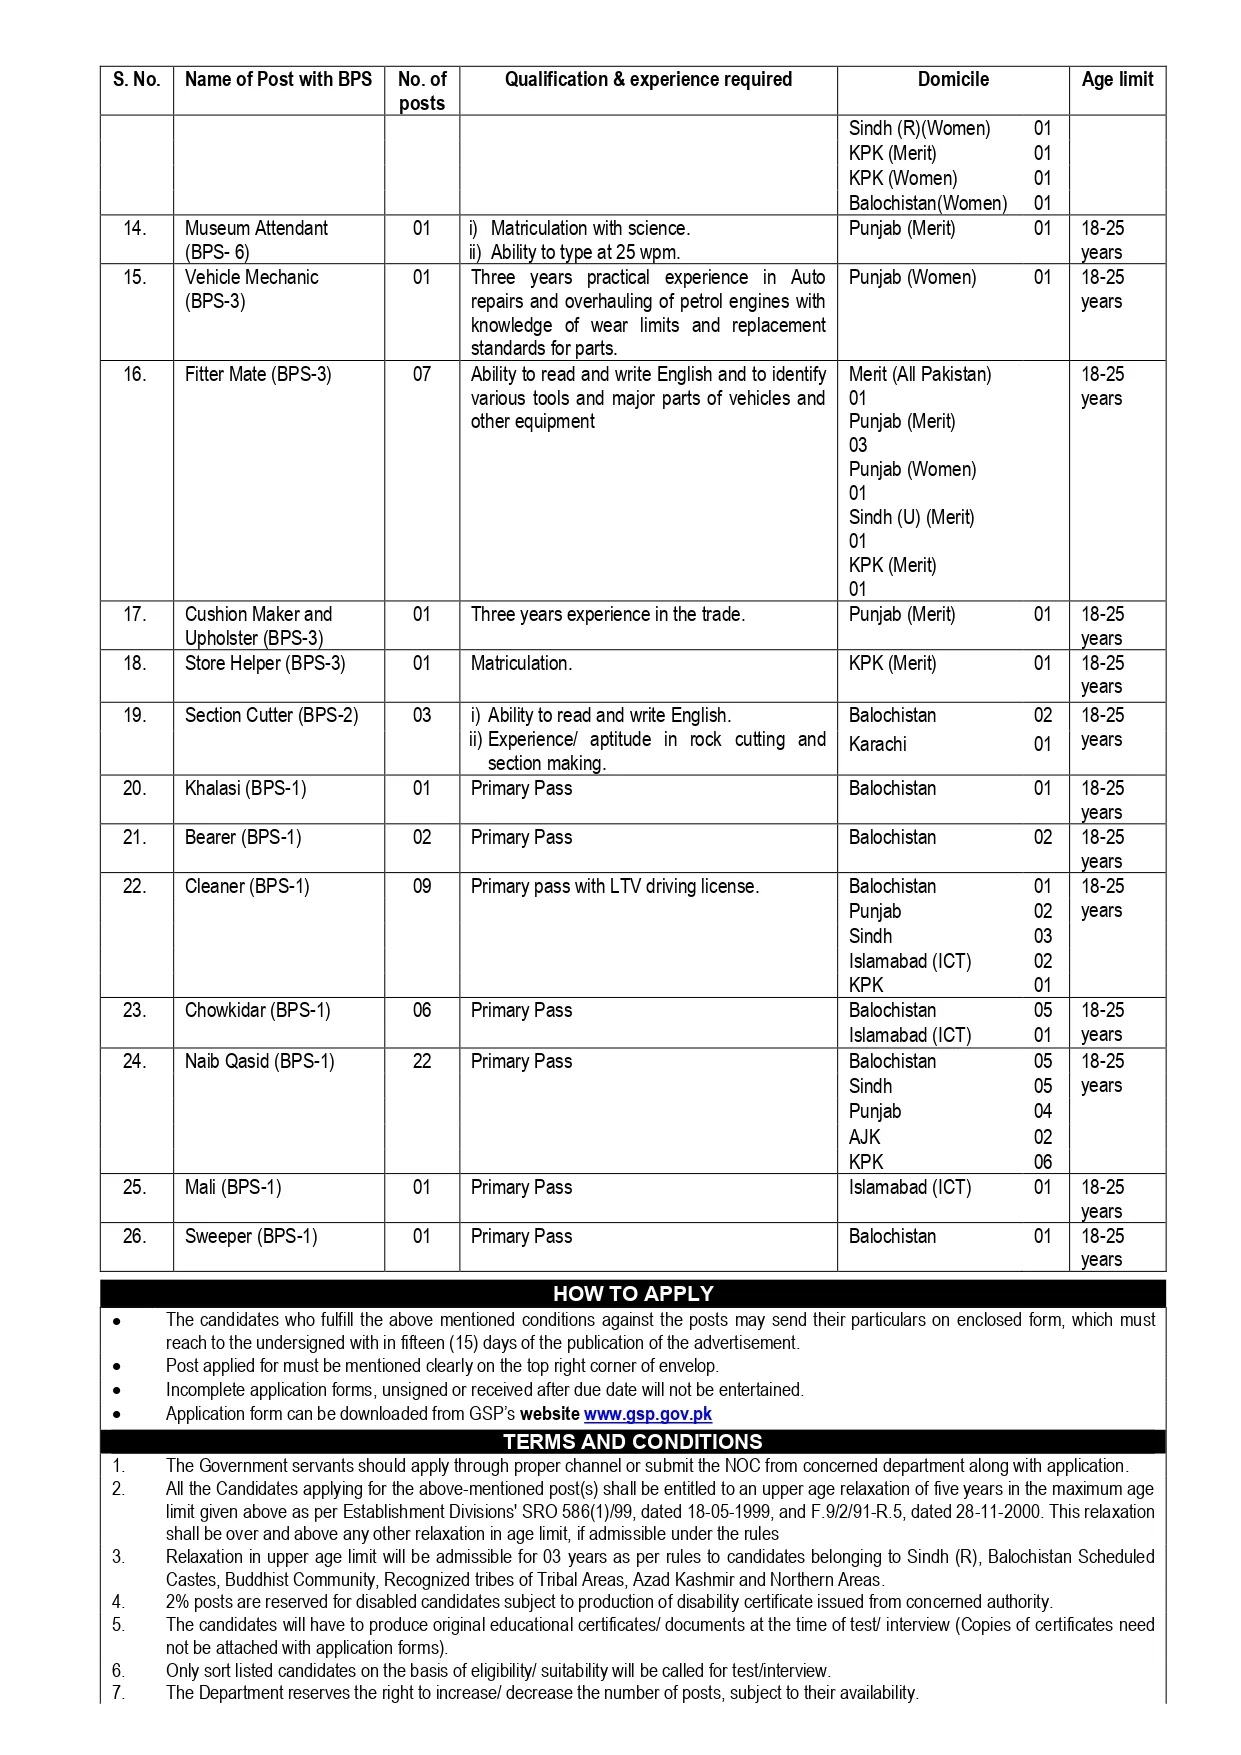 Ministry of Energy Petroleum Division Jobs 2022